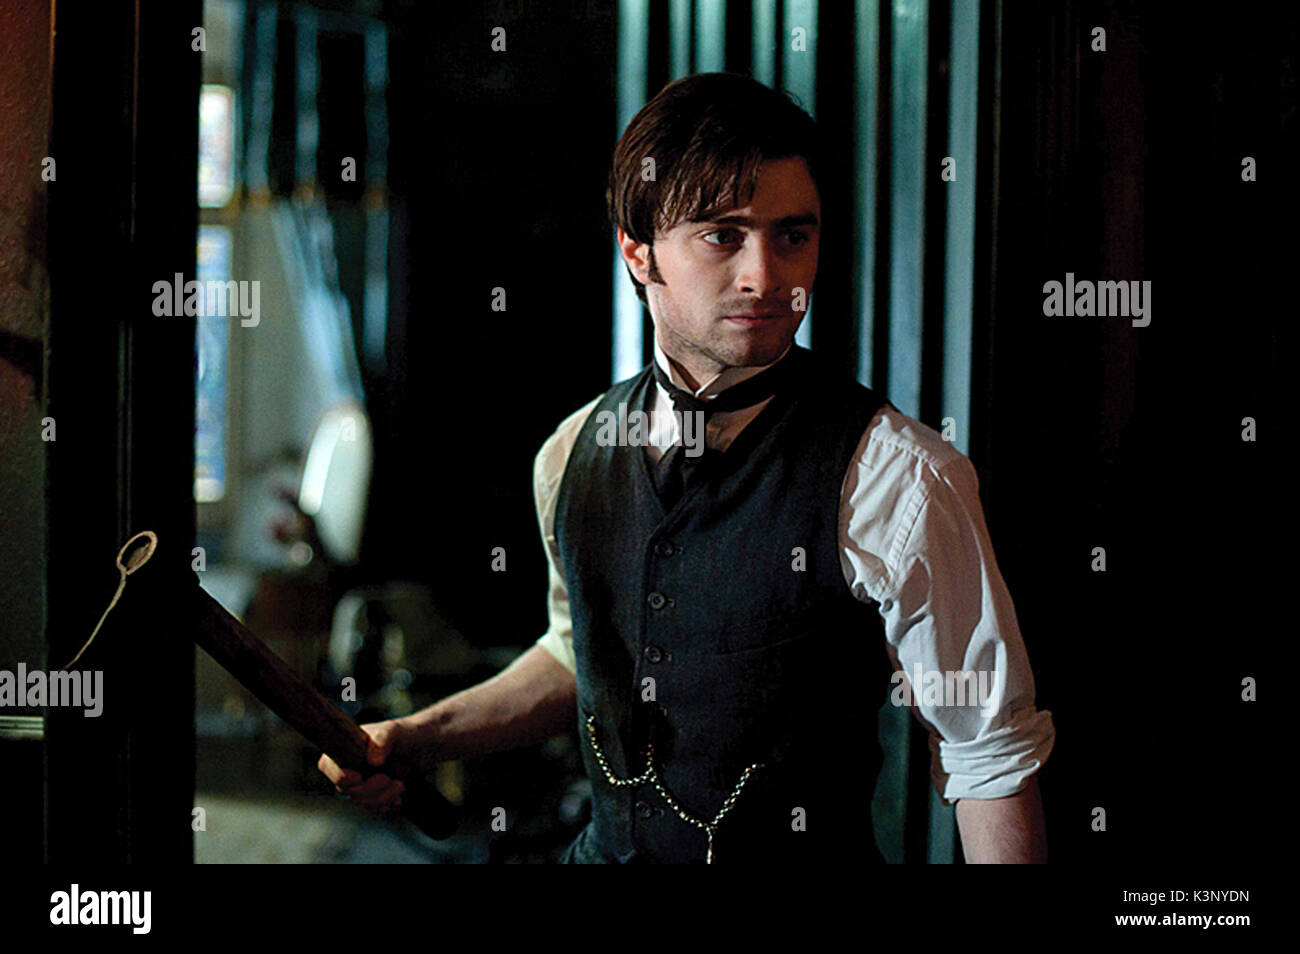 THE Woman in Black [BR / CAN / SWE 2012] Daniel Radcliffe data: 2012 Foto Stock